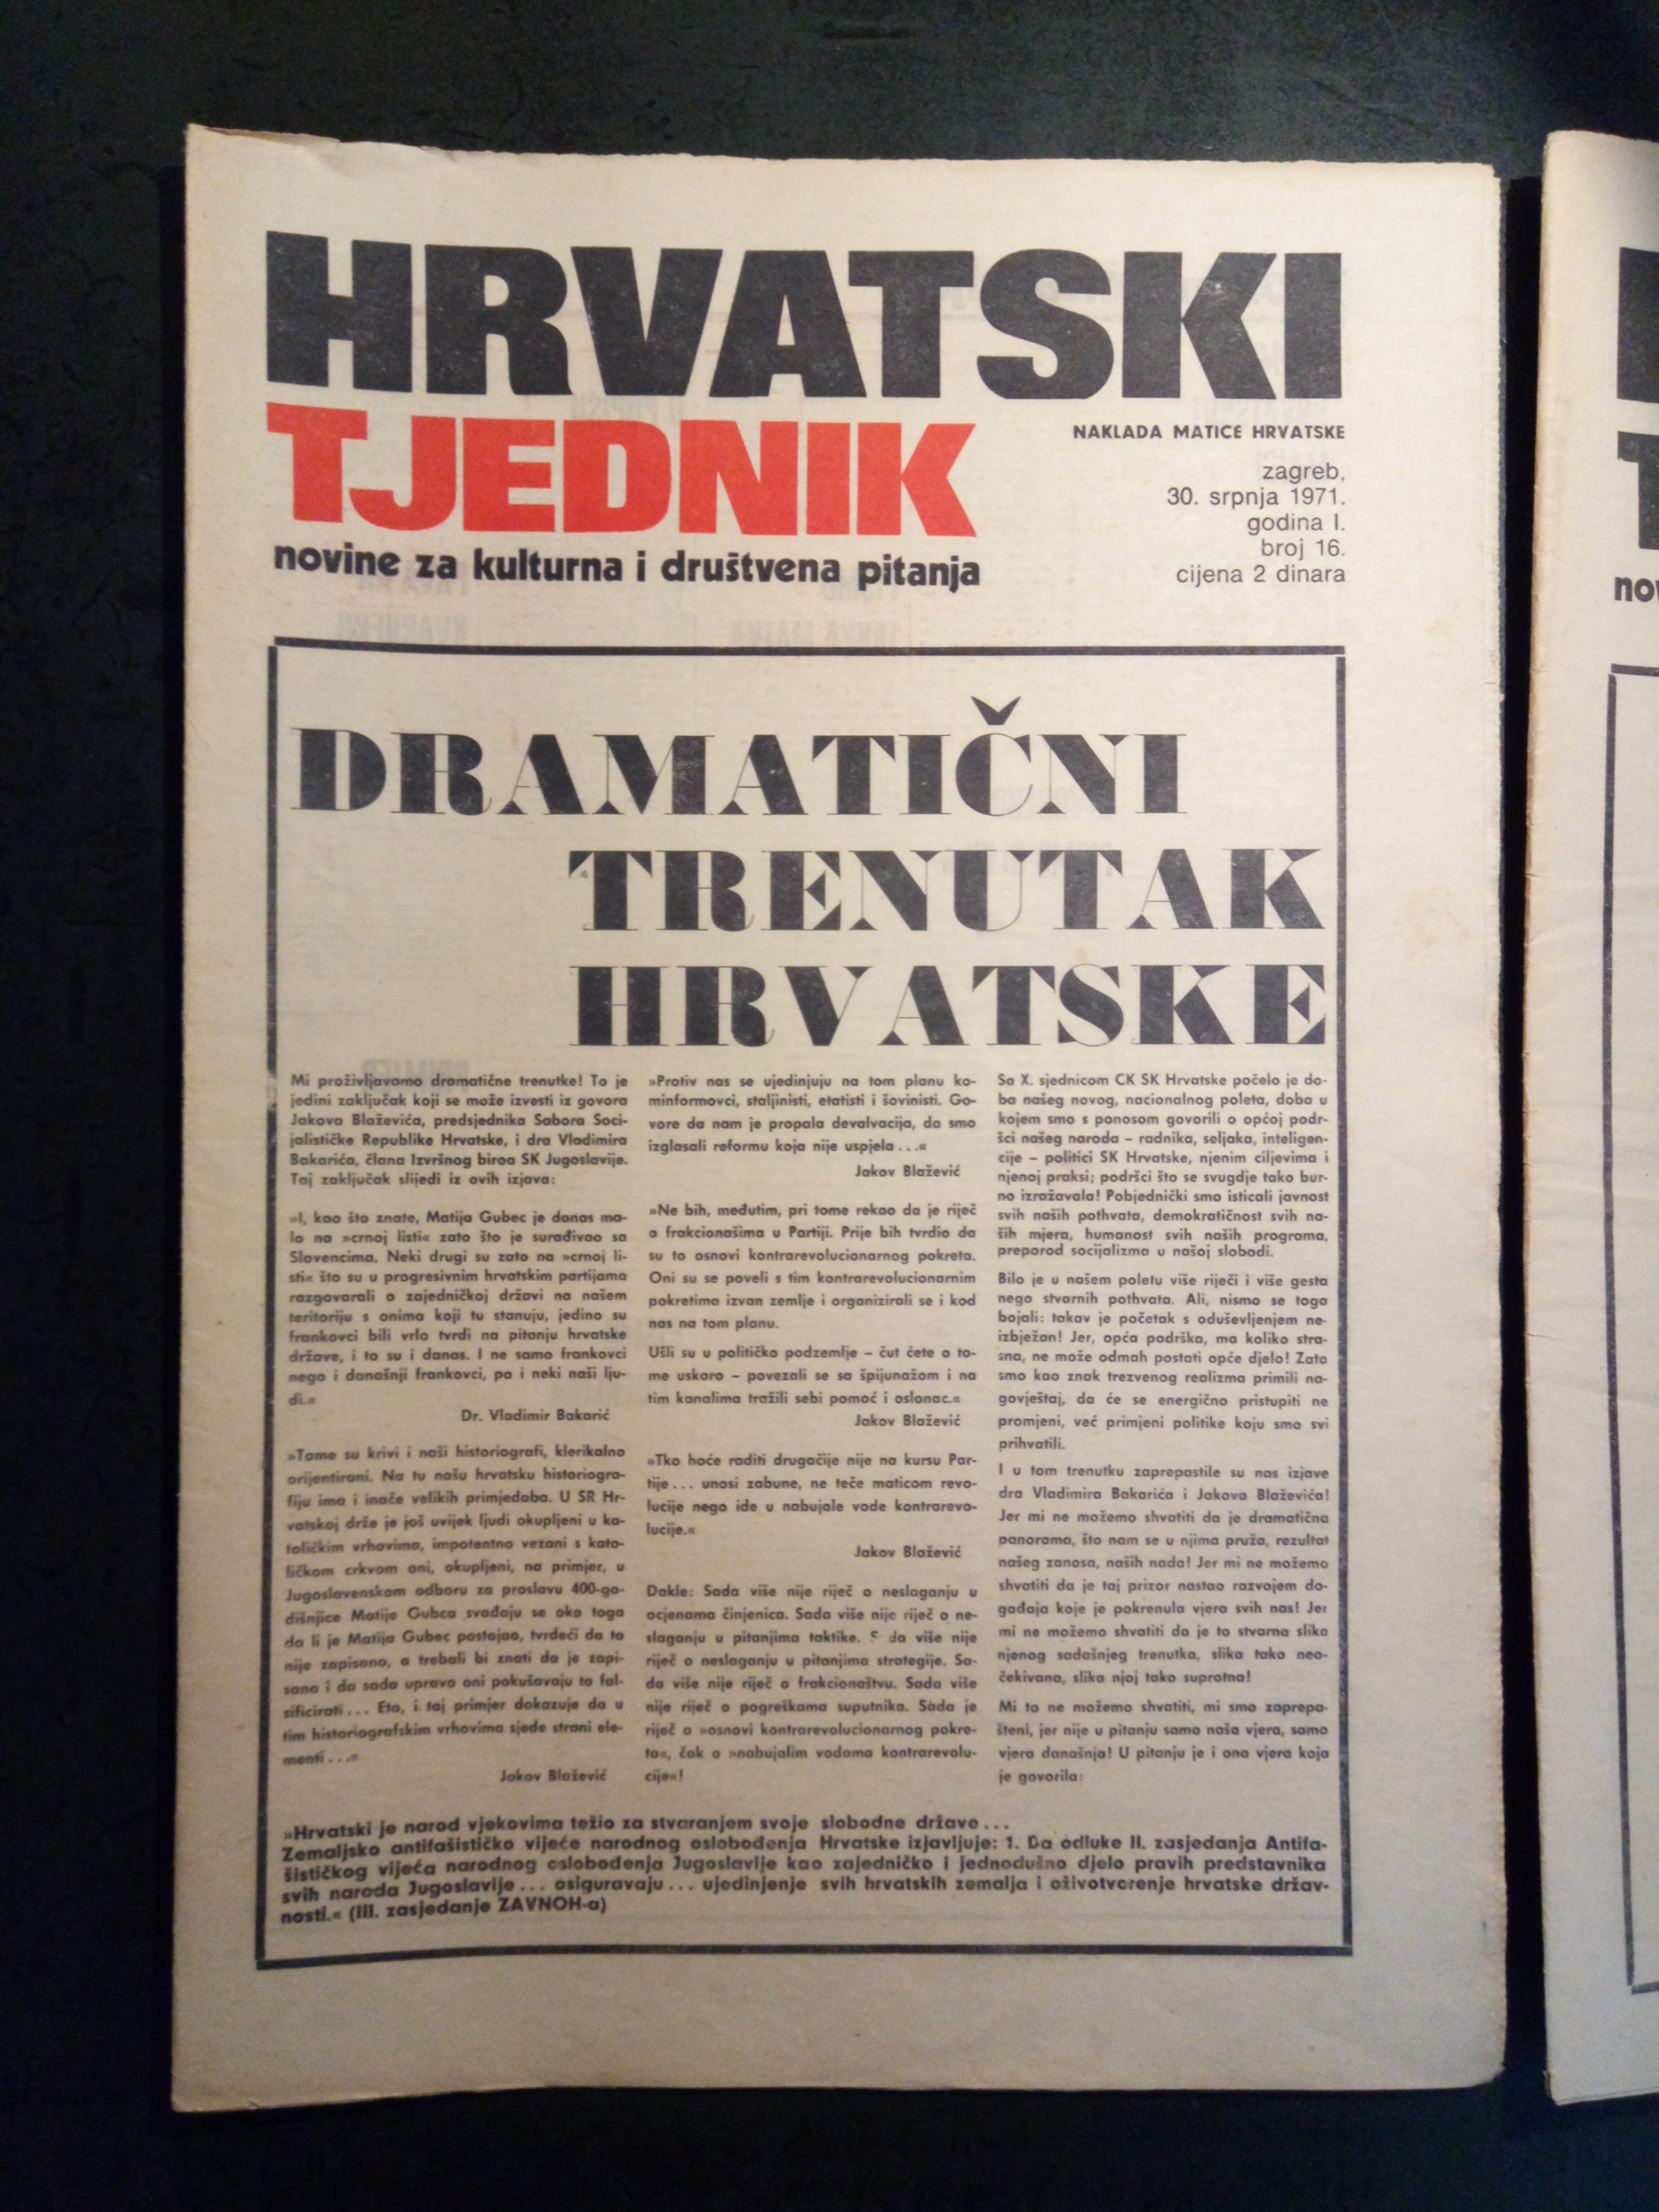 Cover page of the last published issue of the journal Hrvatski tjednik, 1971, Matica hrvatska Collection